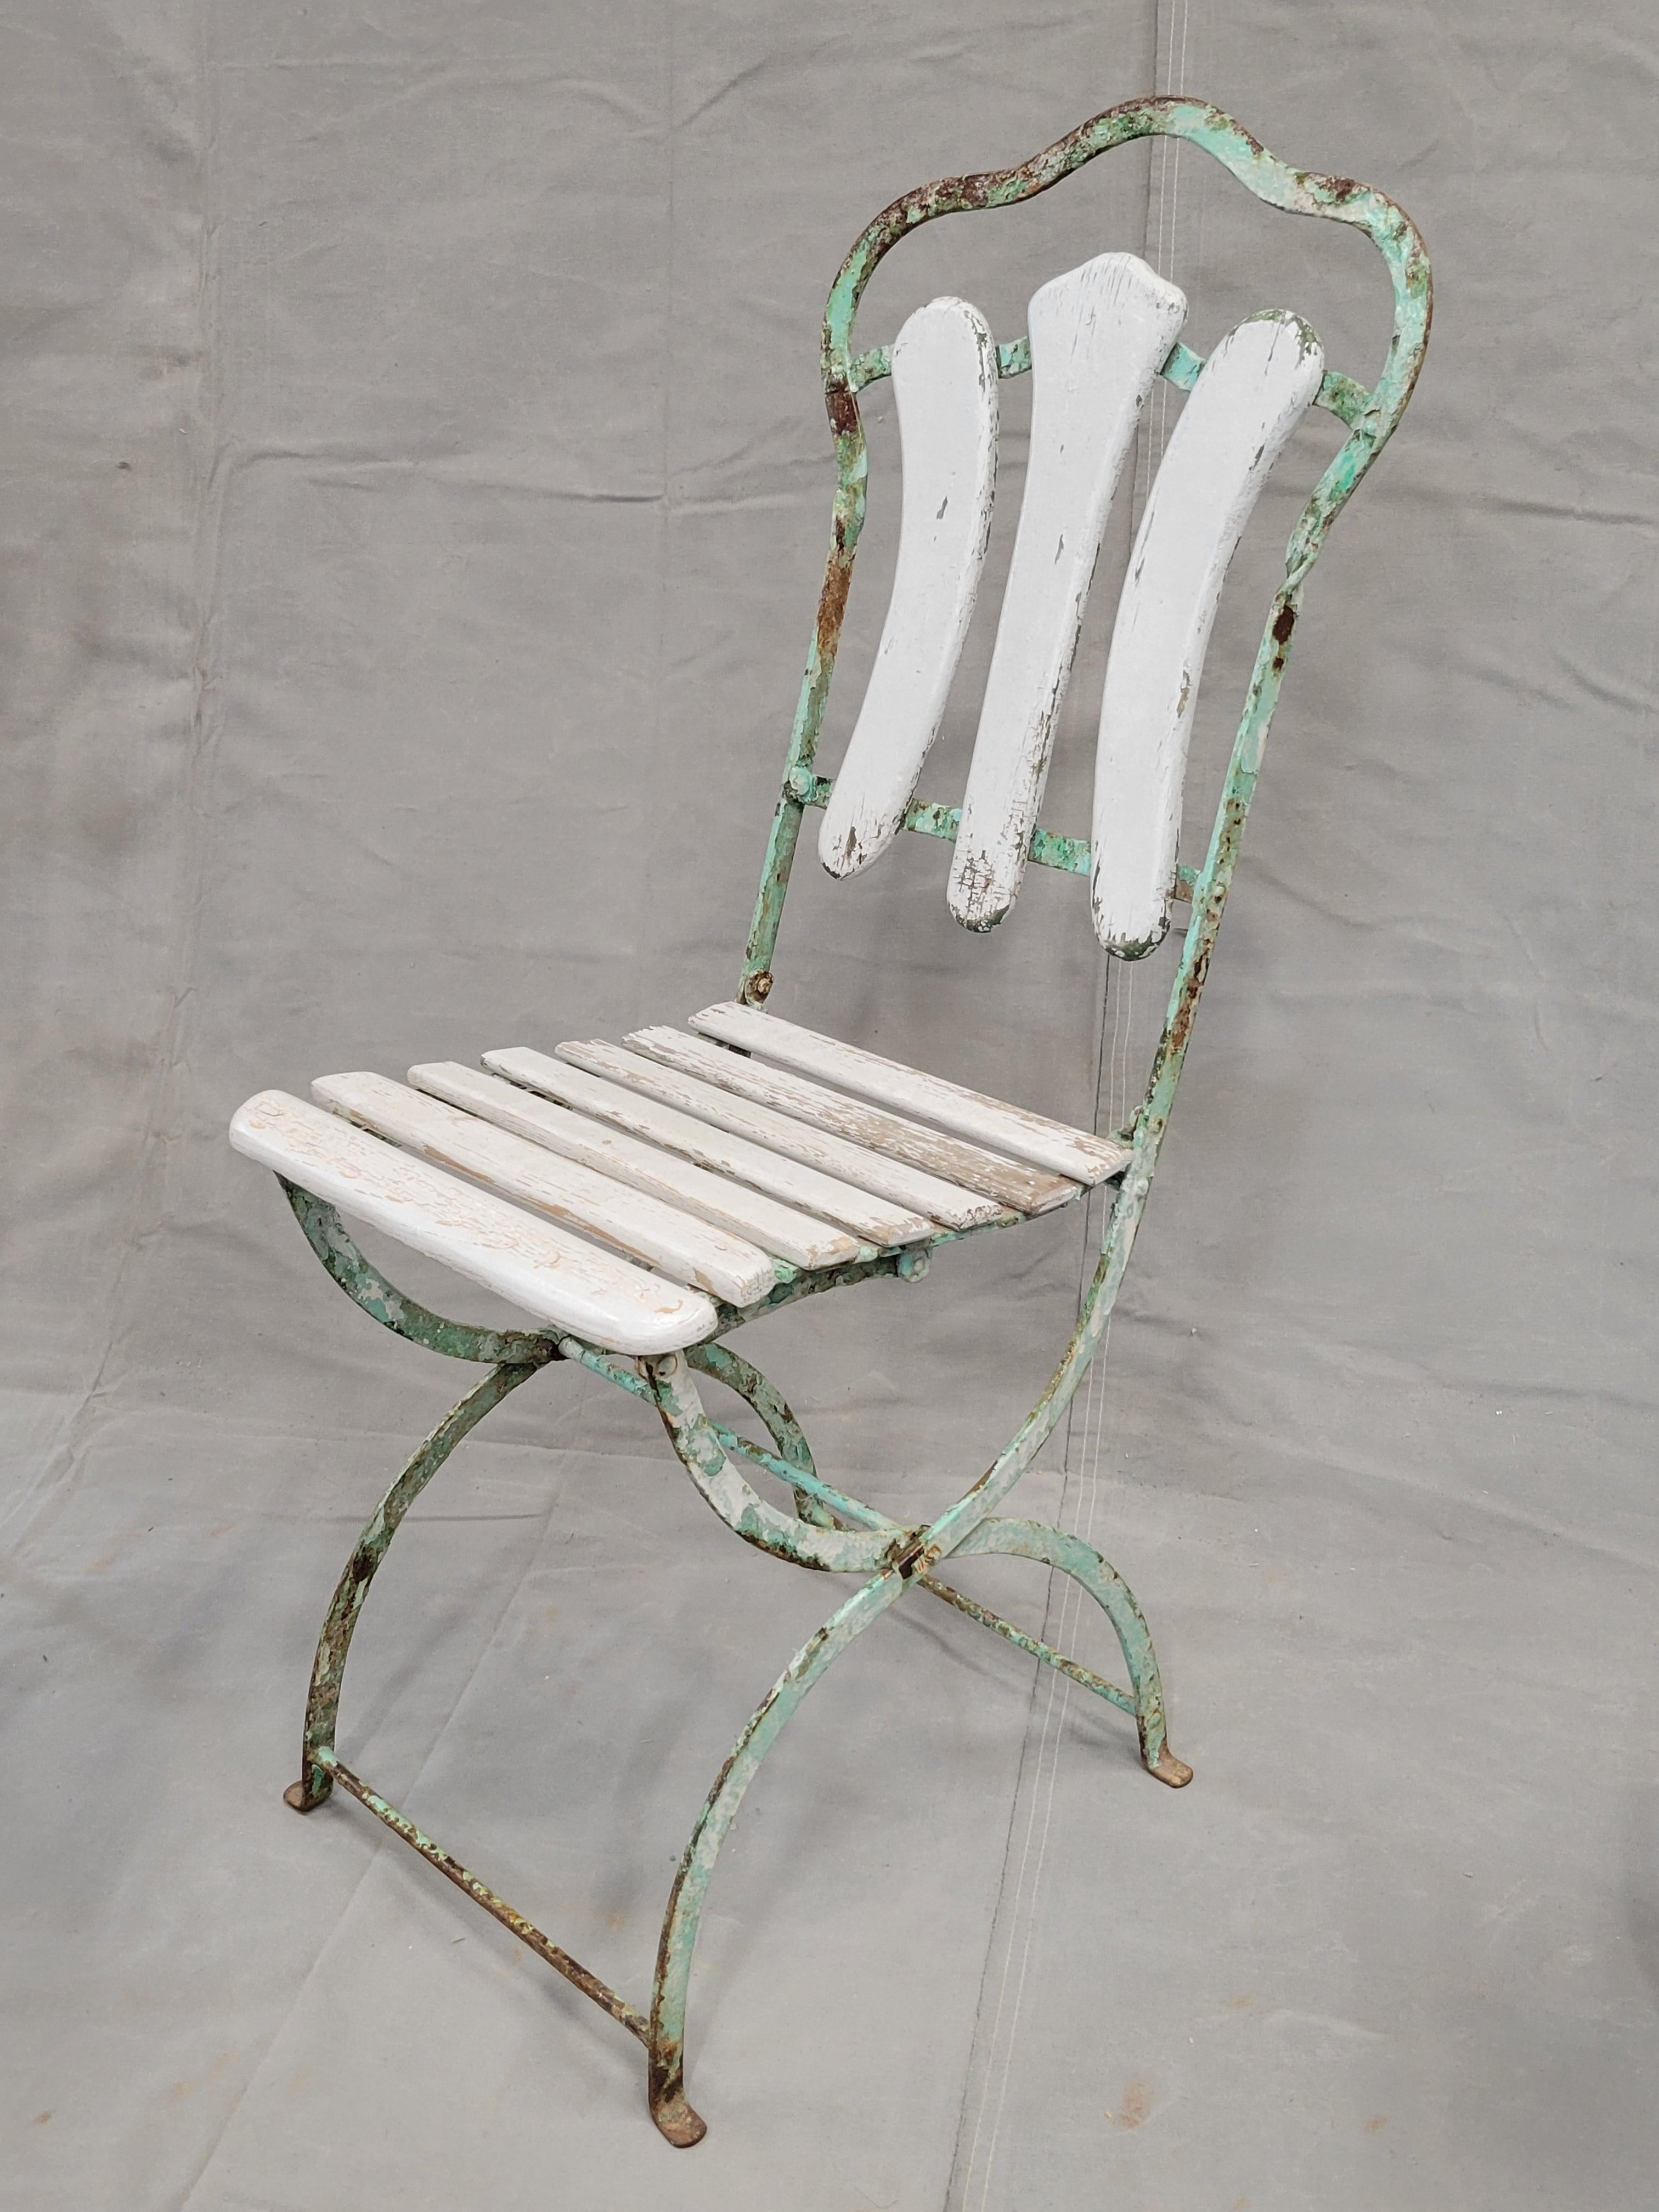 Hand-Crafted Antique French Iron and Wood Folding Bistro Garden Chairs - Set of 3 For Sale